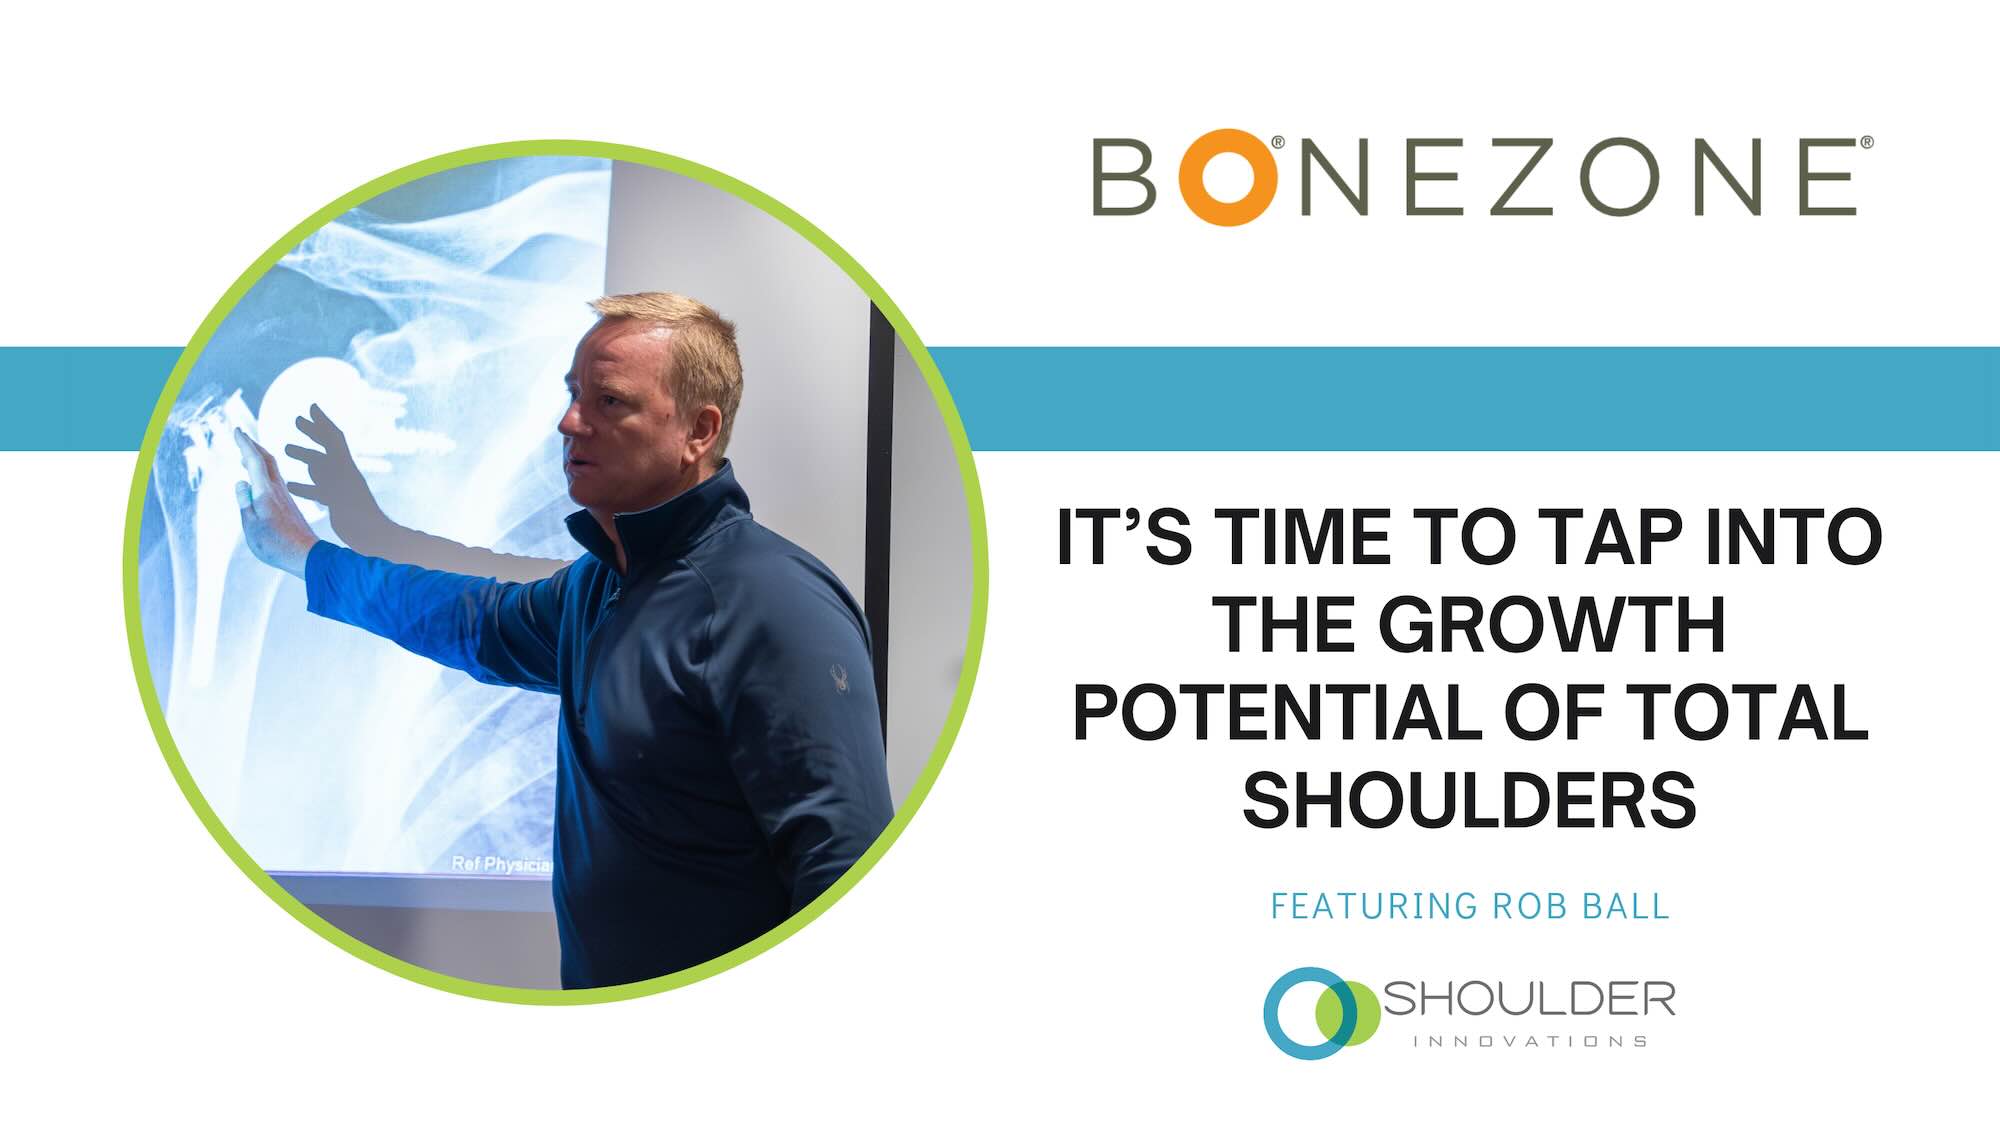 BONEZONE: It’s Time to Tap into the Growth Potential of Total Shoulders